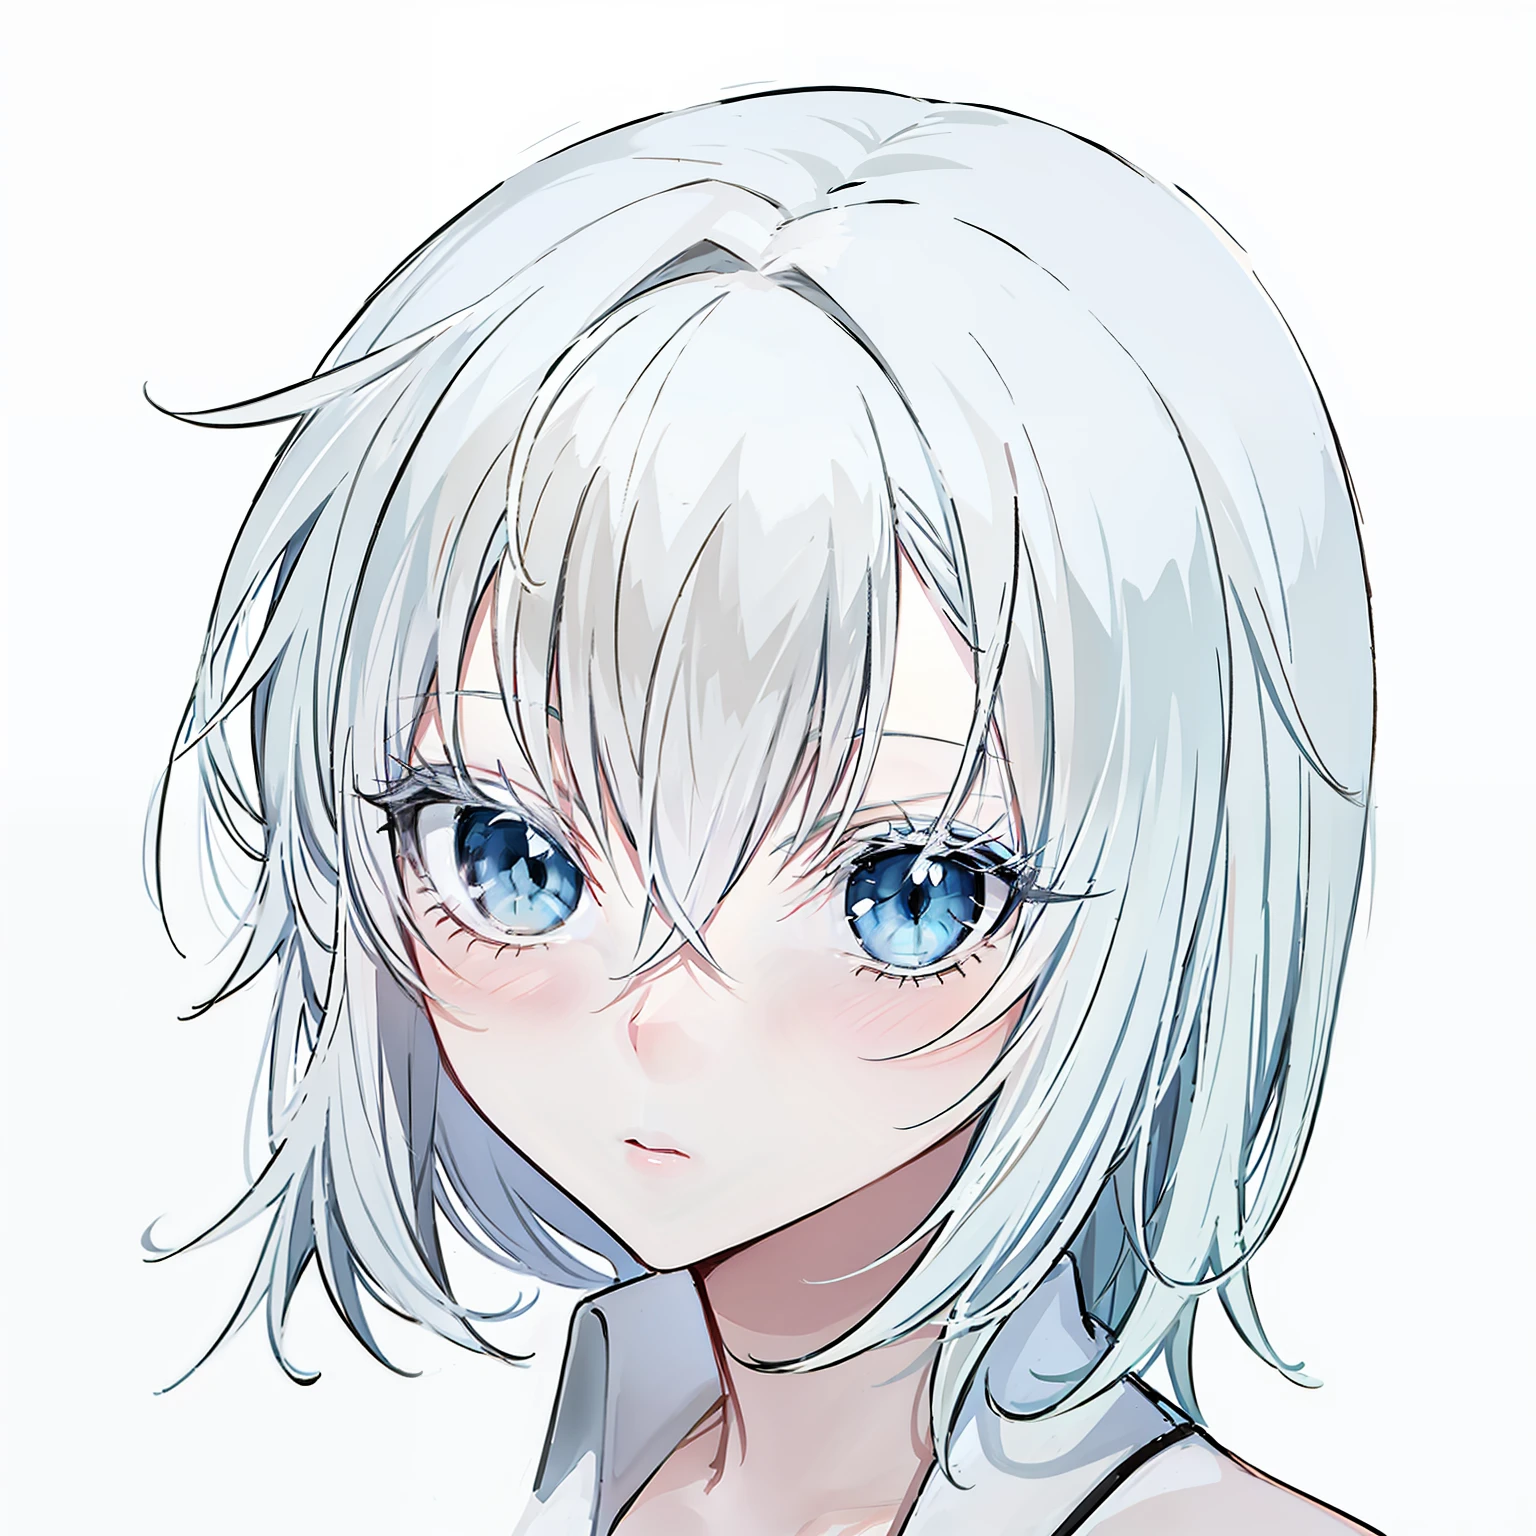 anime - style image of a woman with white hair and blue eyes, white haired, girl with short white hair, girl with white hair, neferpitou, white-haired, render of april, perfect white haired girl, silver haired, white haired lady, fubuki, with short bobbed white hair, white haired deity, anime character, cute natural anime face，whaite hair，Purple eyes，downy，Beauty in the world，Comic style，Oil painting style，medieval times，high qulity， --auto